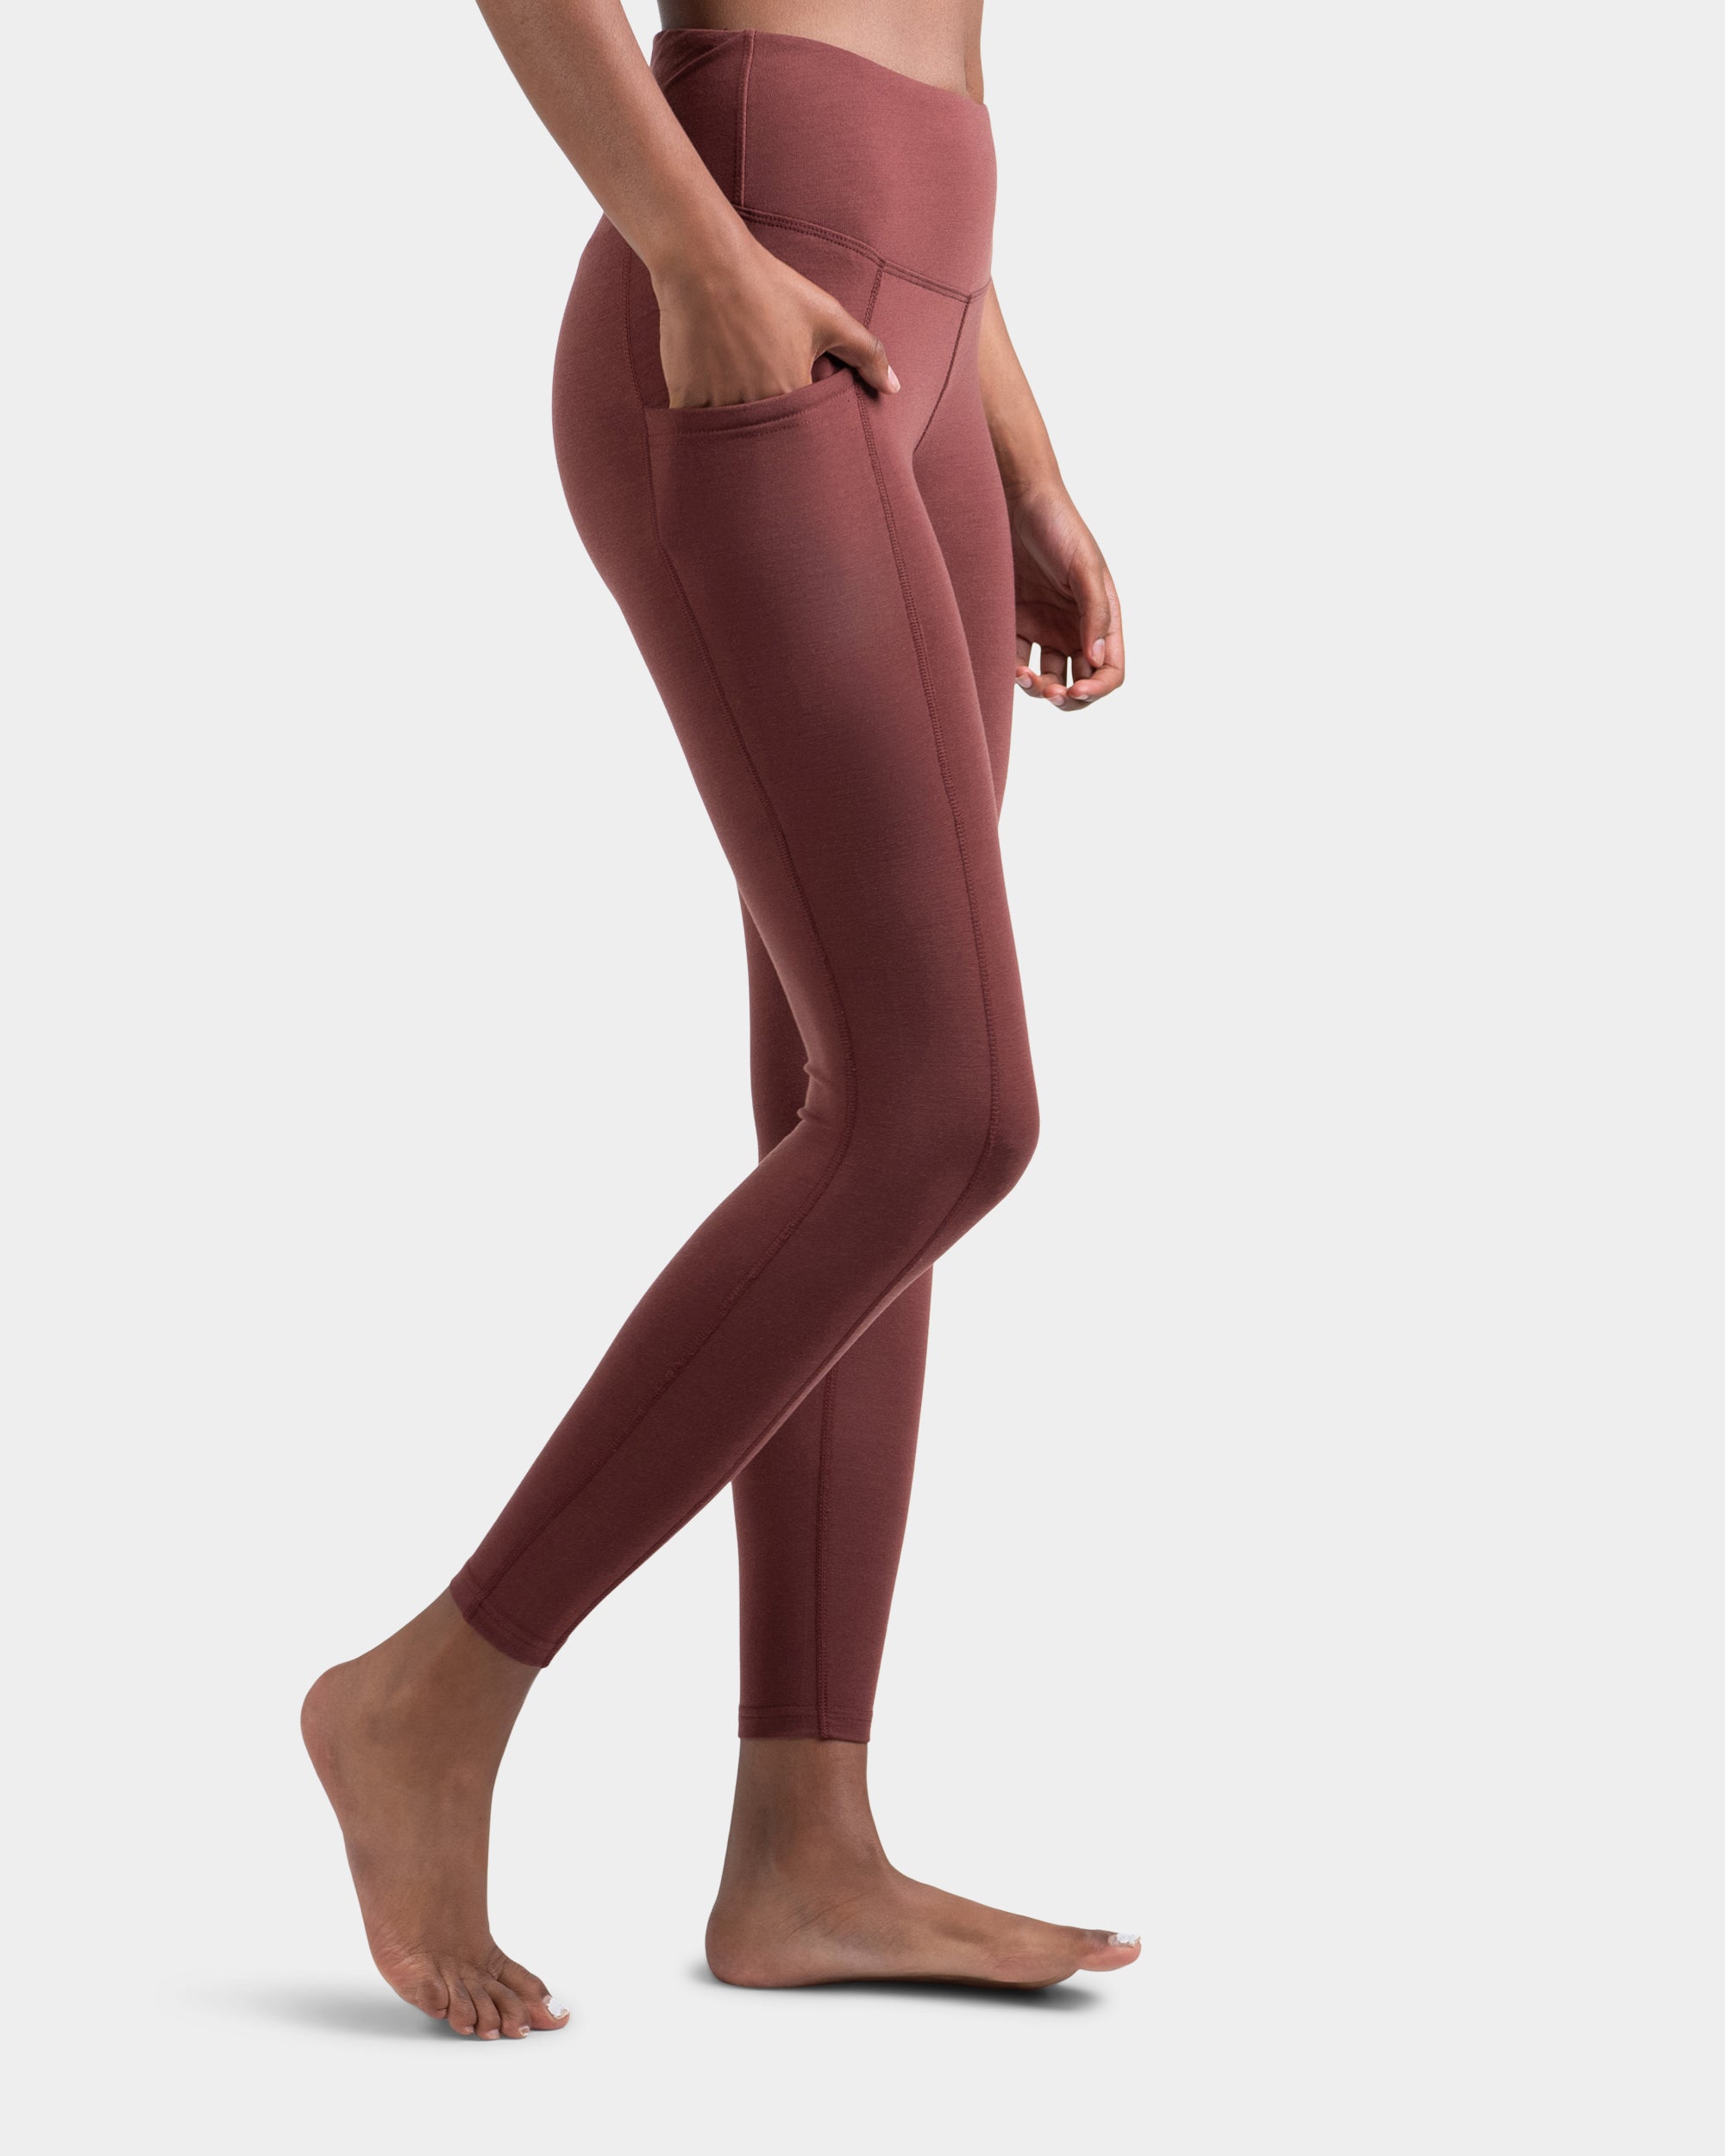  Leggings with Pockets for Women,Yoga Pants High